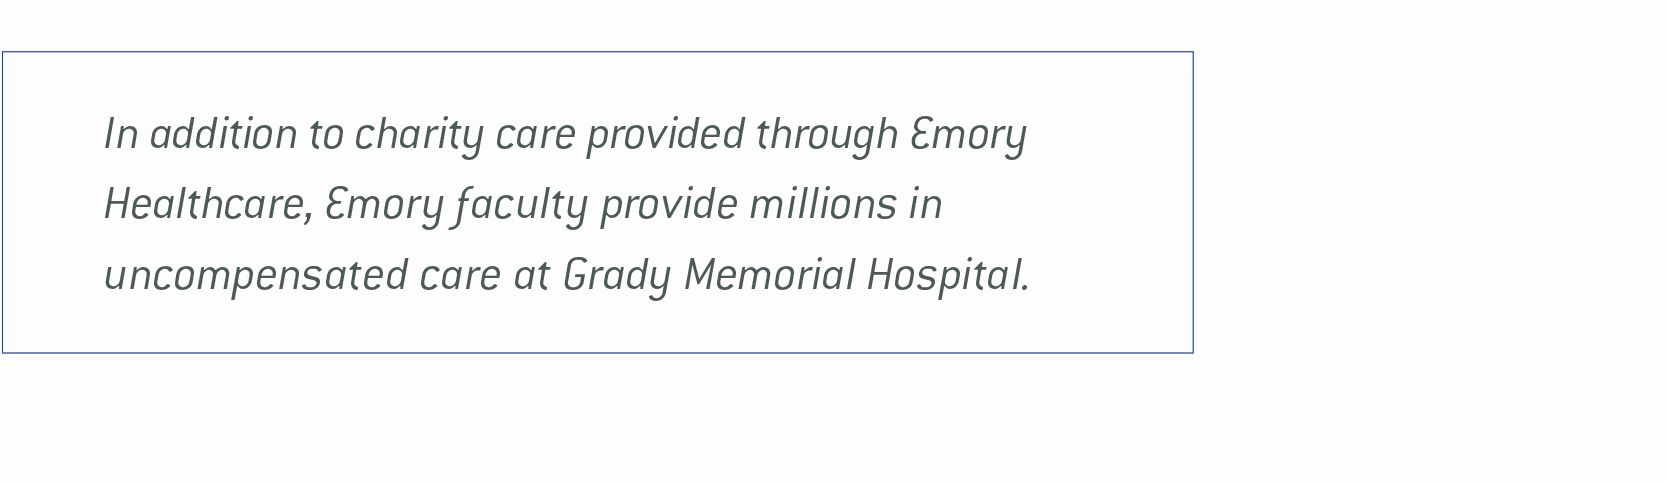 image of text box that reads In addition to charity care provided through Emory Healthcare, Emory faculty provide millions in uncompensated care at  Grady Memorial Hospital.